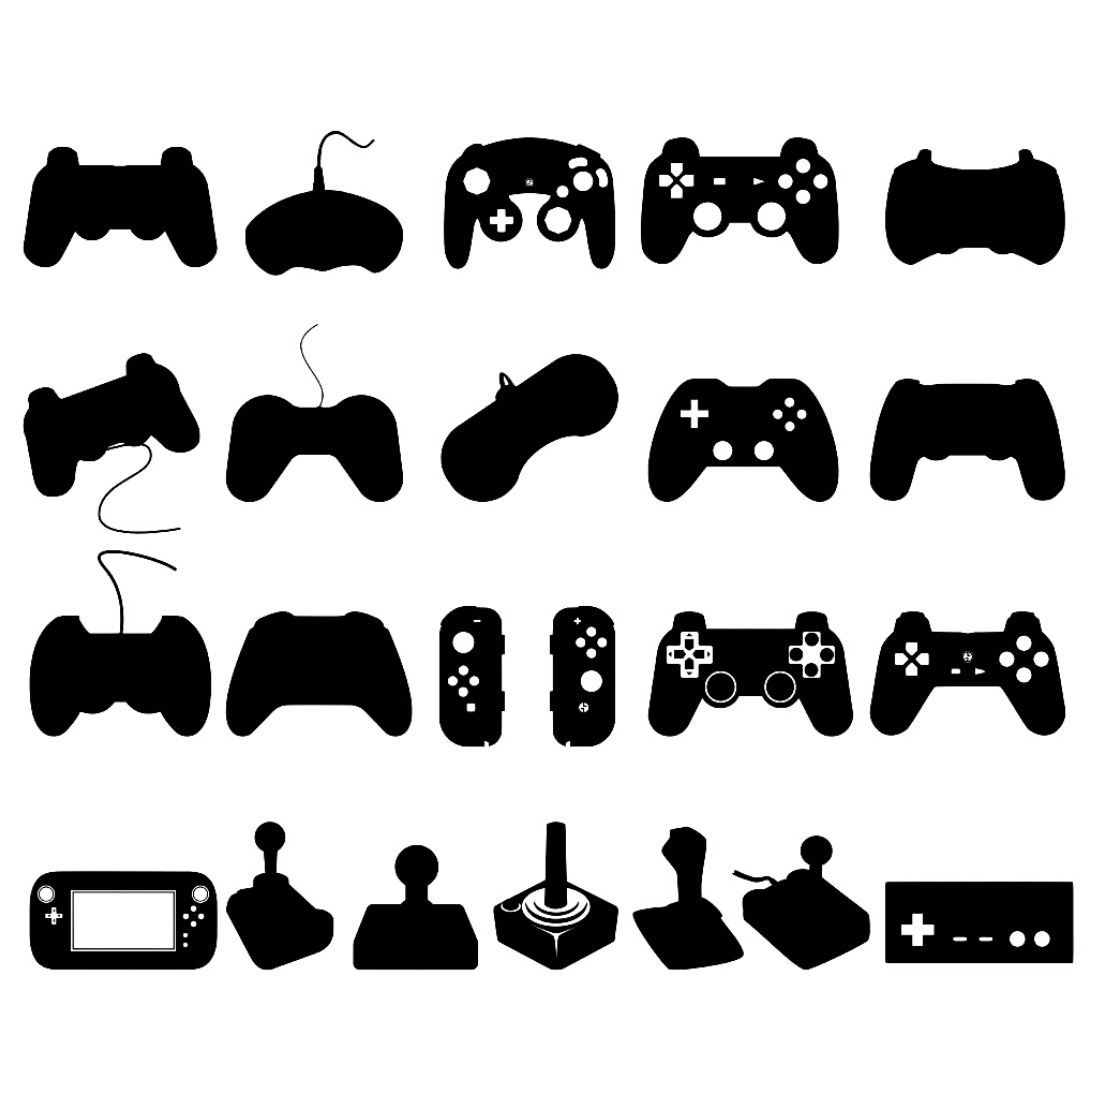 Game Controller Silhouette Bundles cover image.